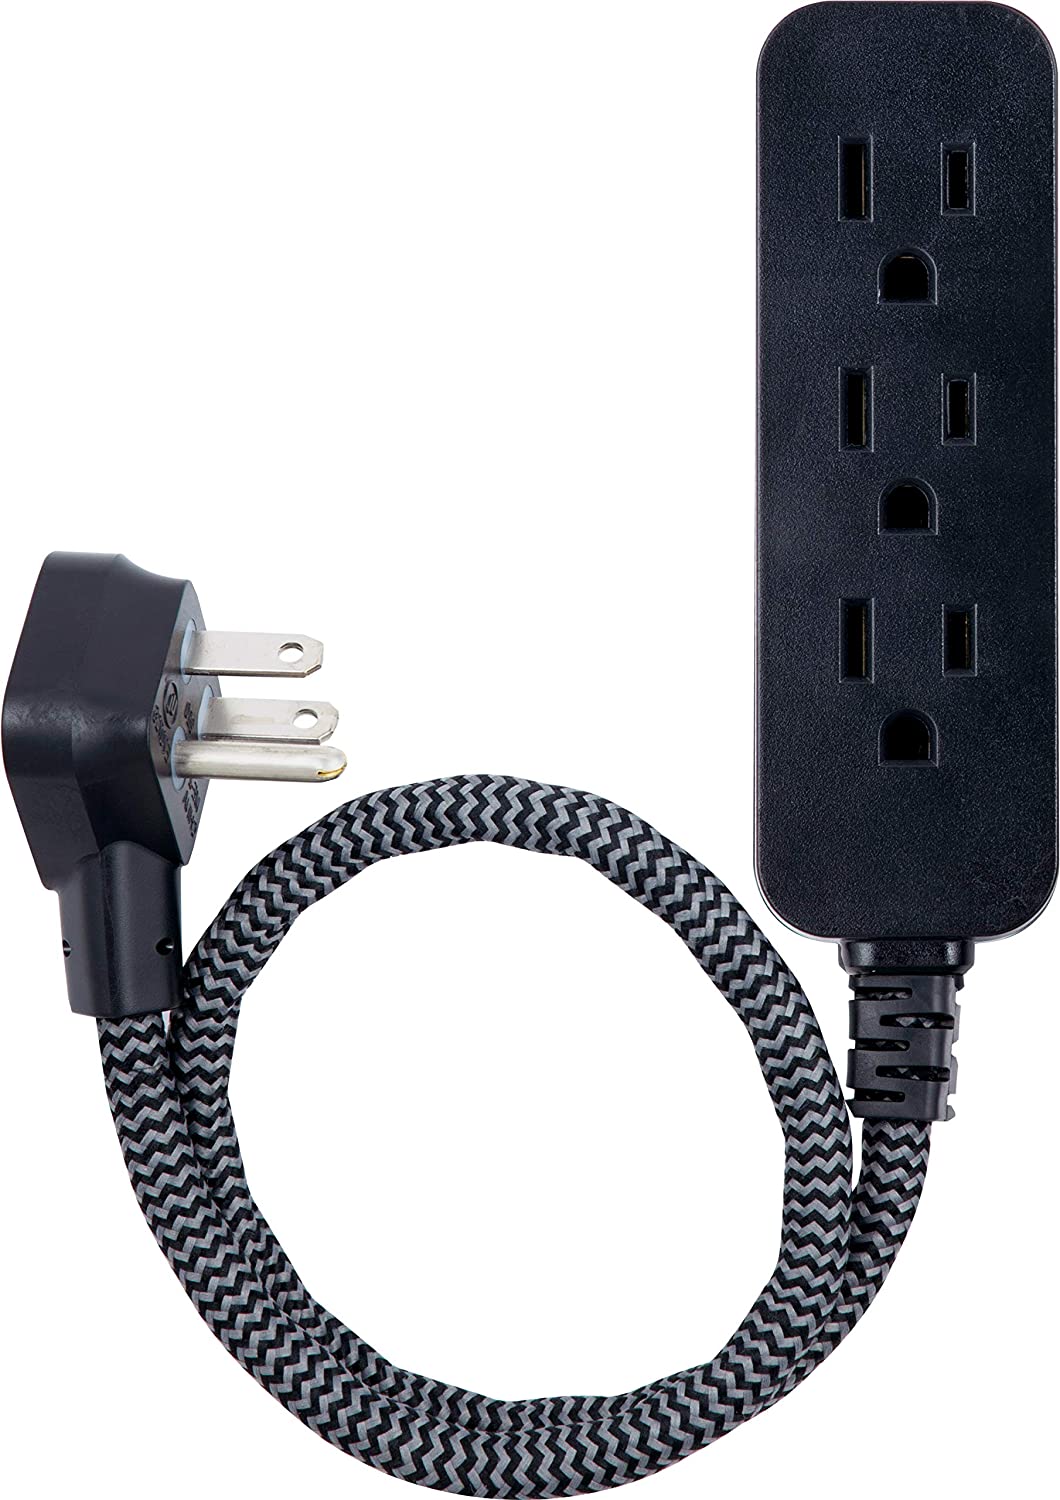 2-Pack Flat 3-Outlet Extension Cord with Space Saver Outlet Plug